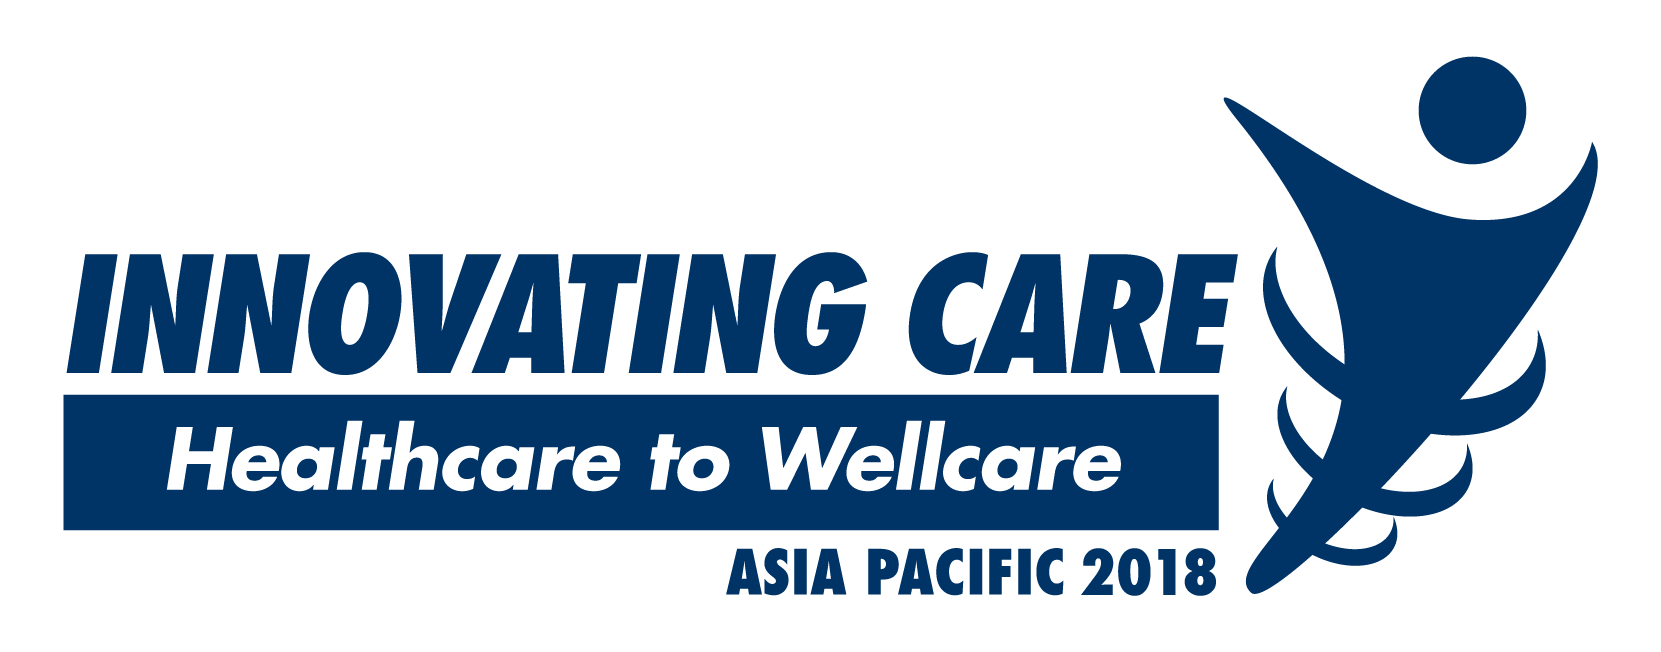 Photos of Innovating Care Asia Pacific 2018